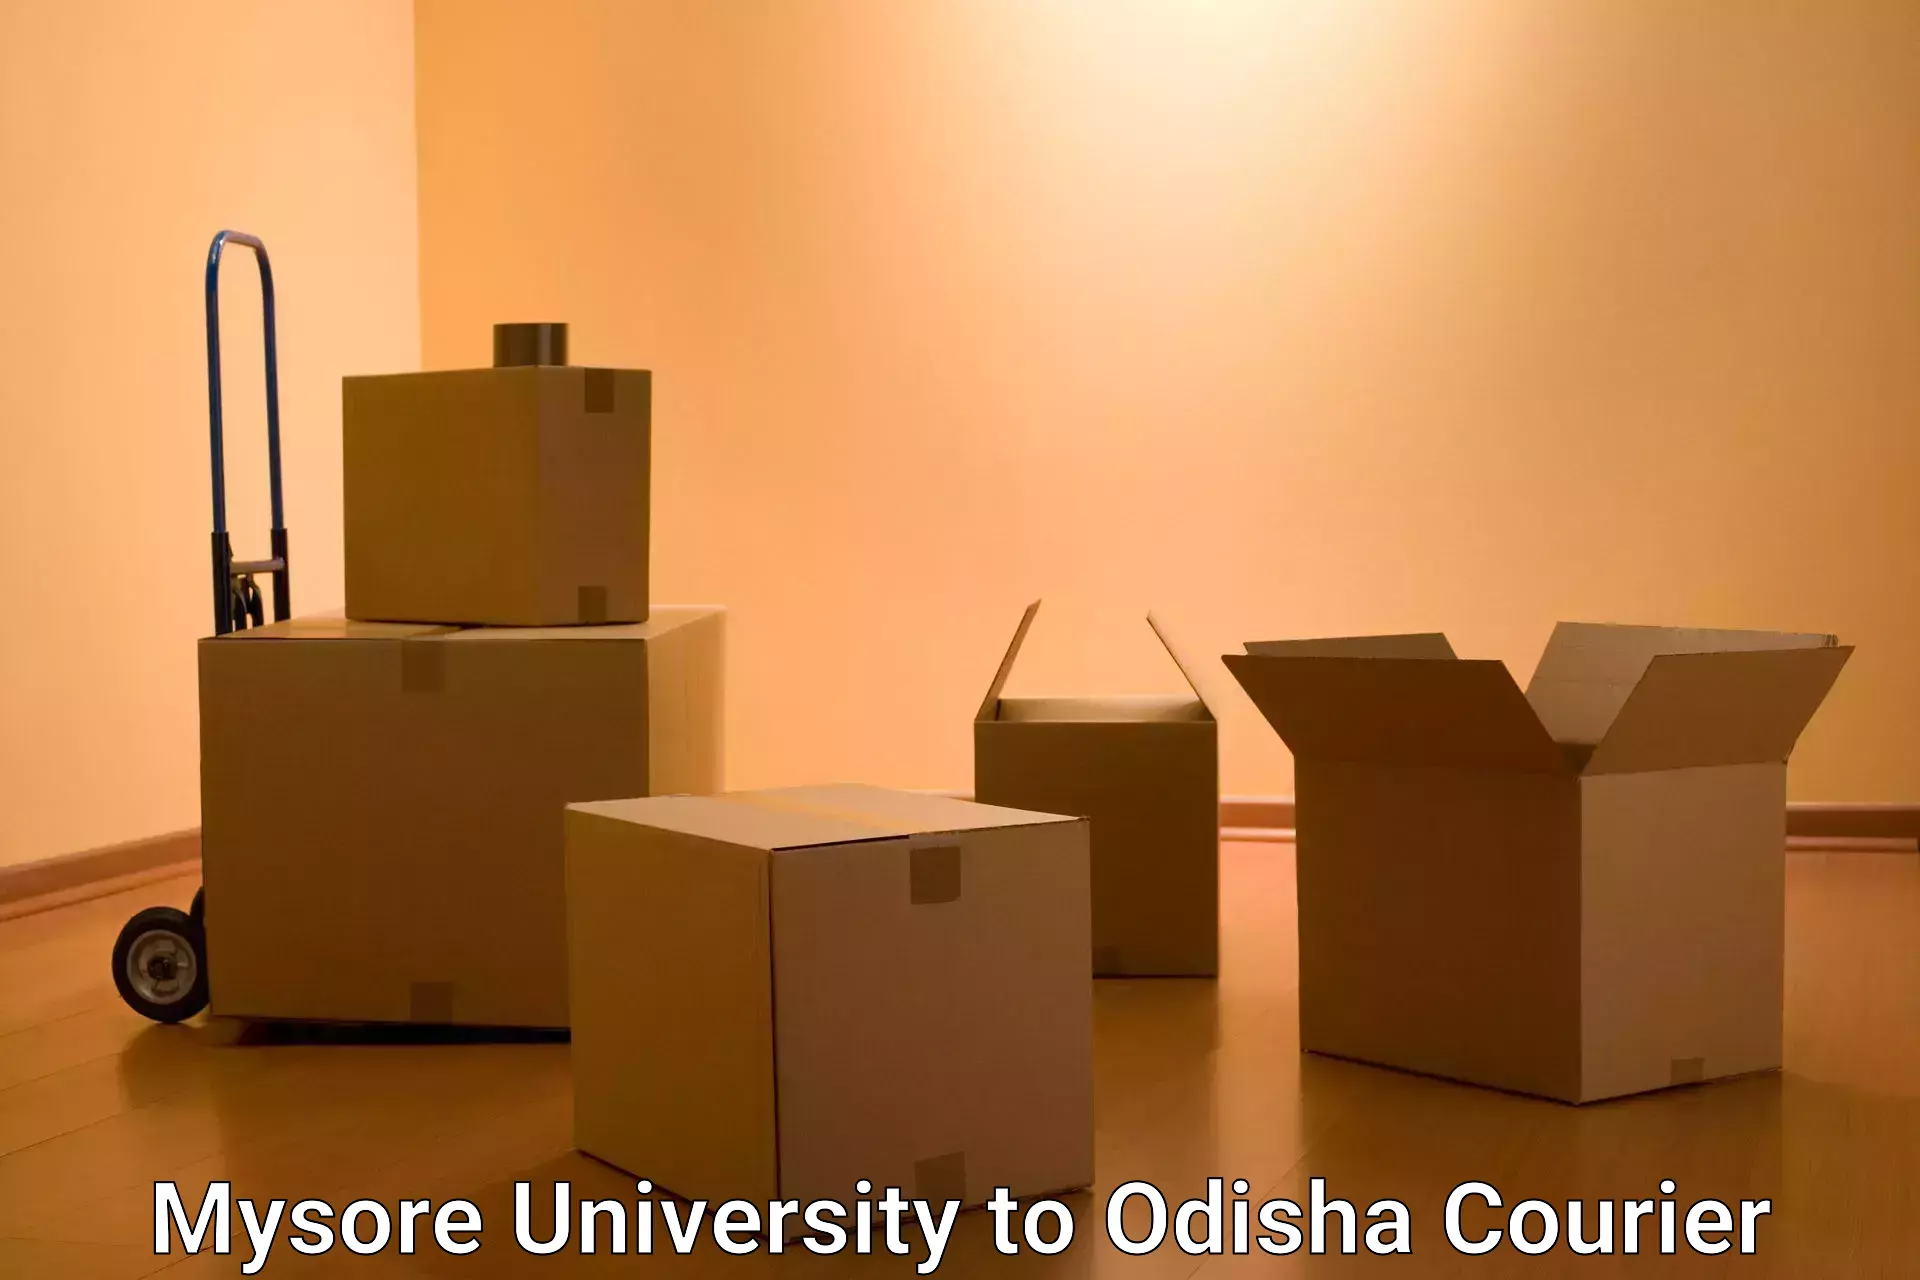 Efficient courier operations in Mysore University to Odisha